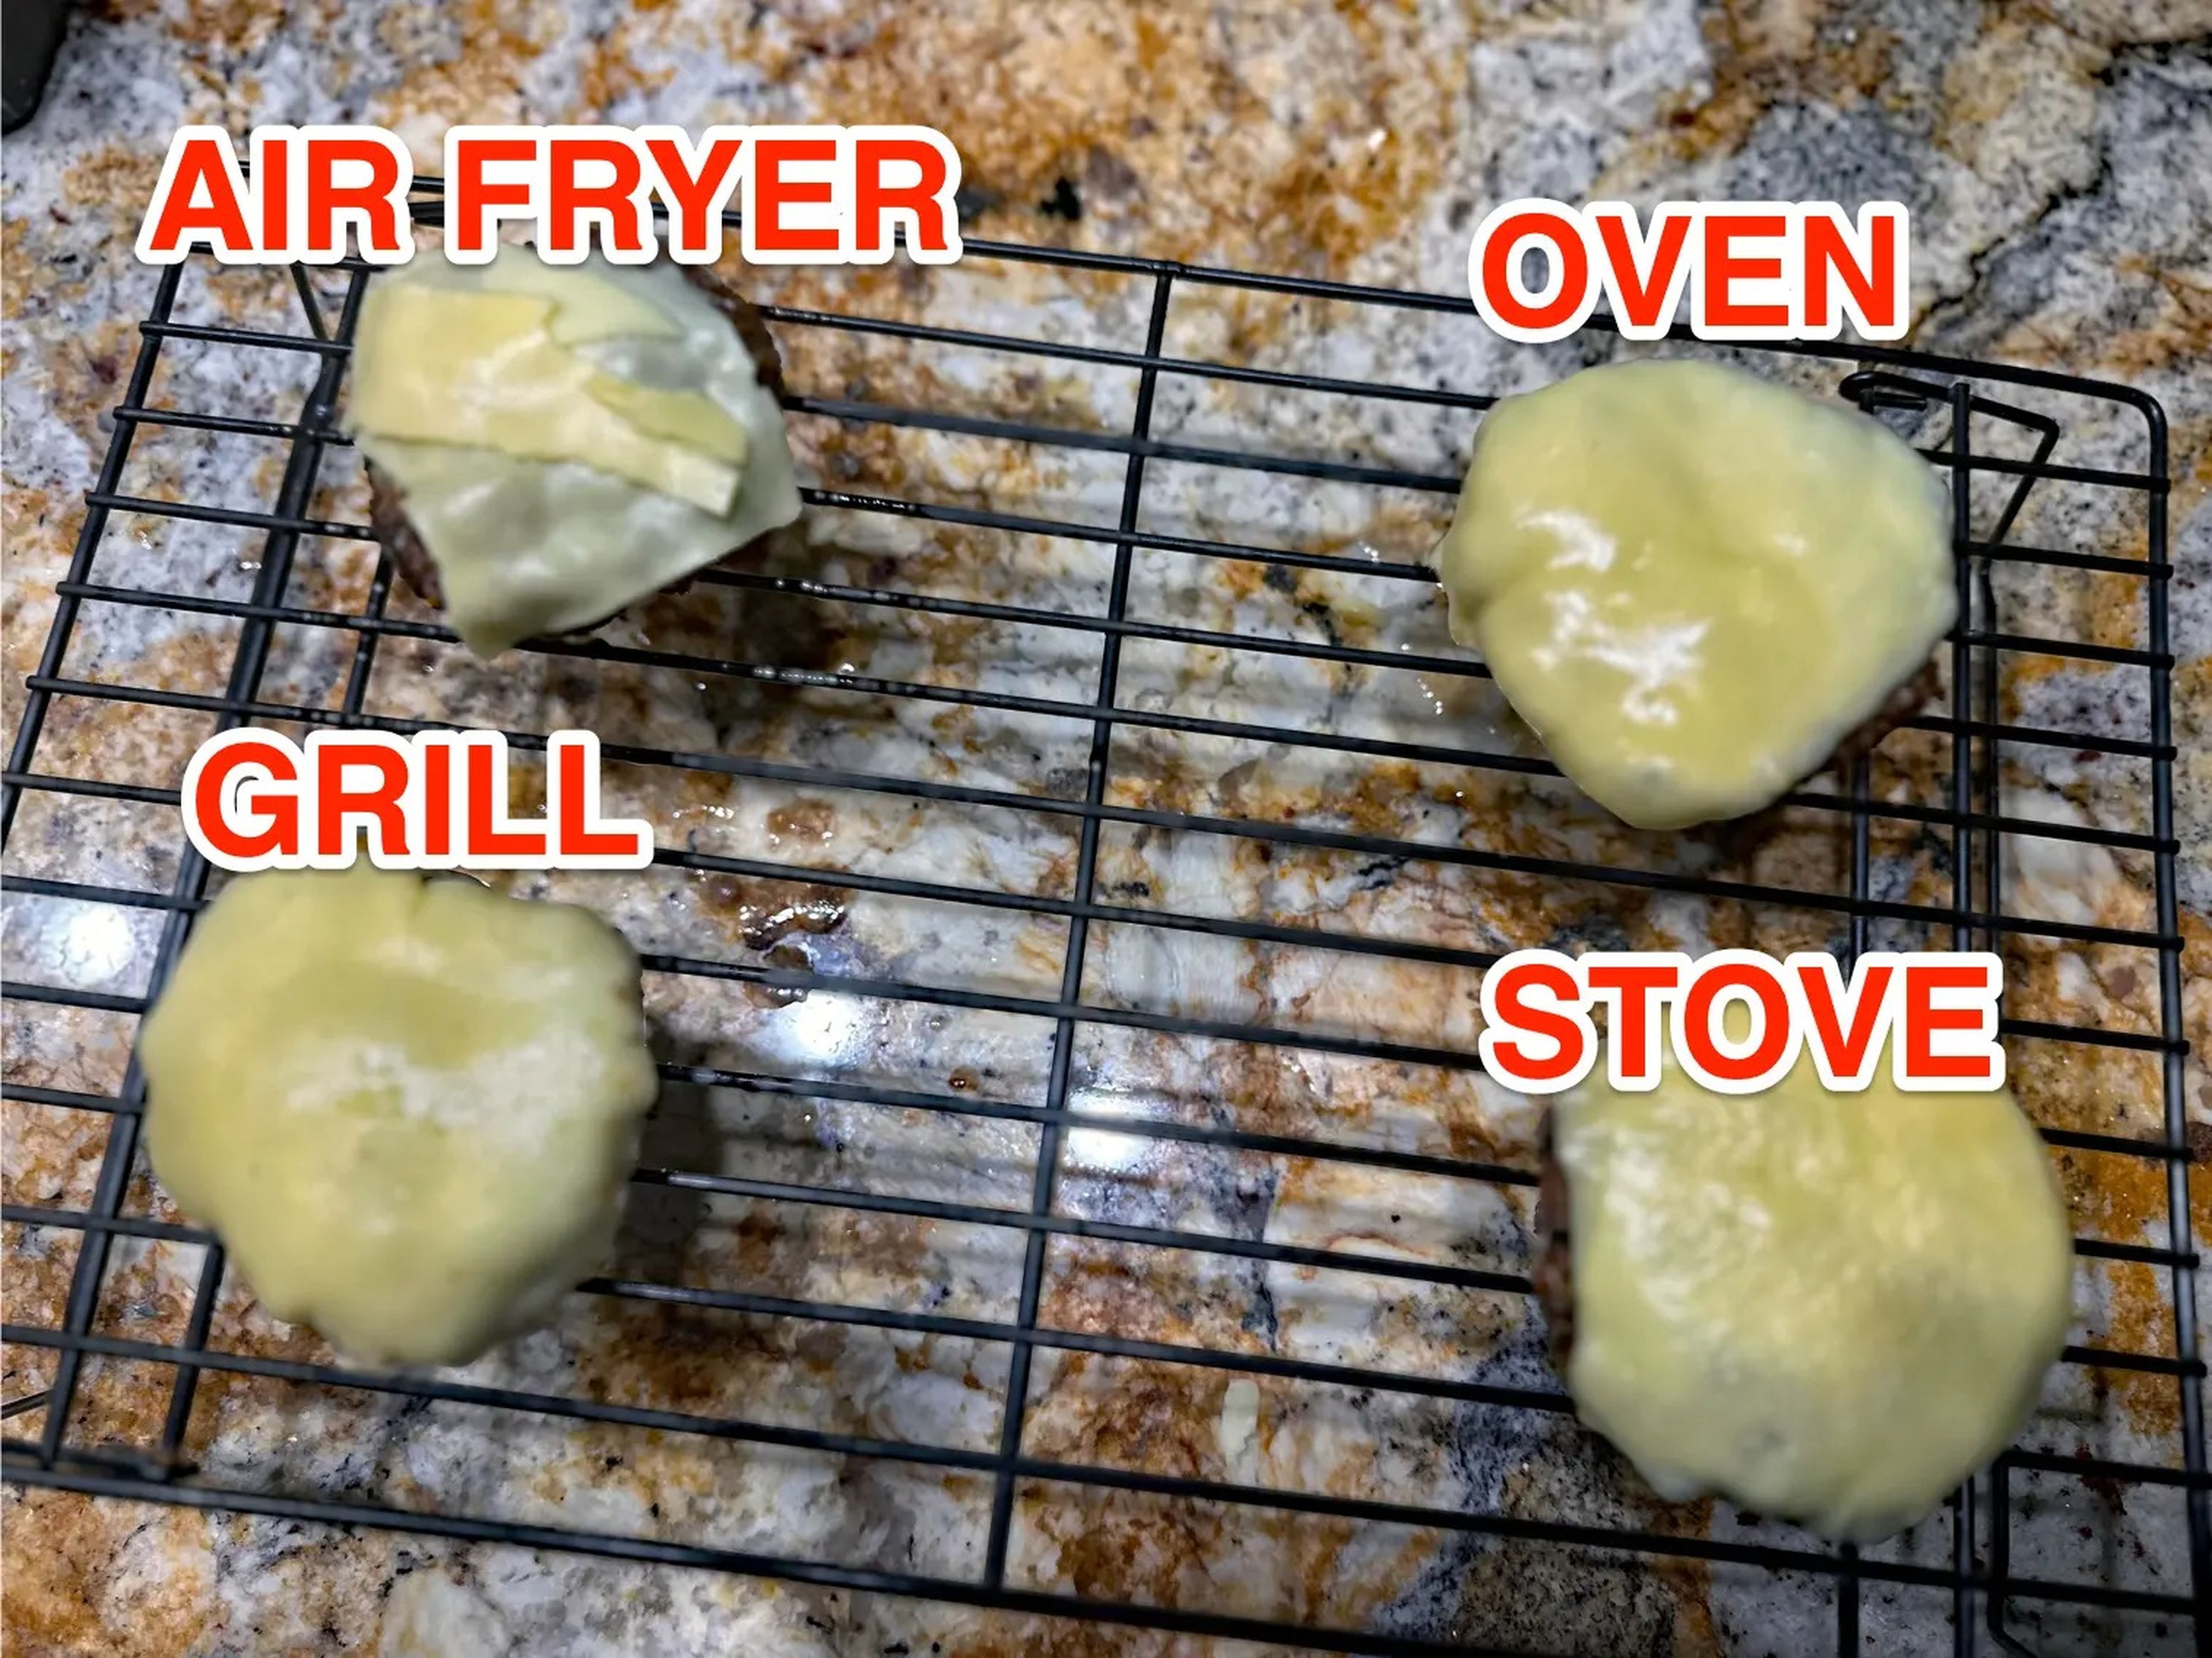 cheeseburgers made in the air fryer, oven, grill, and stove labeled on a cooling rack